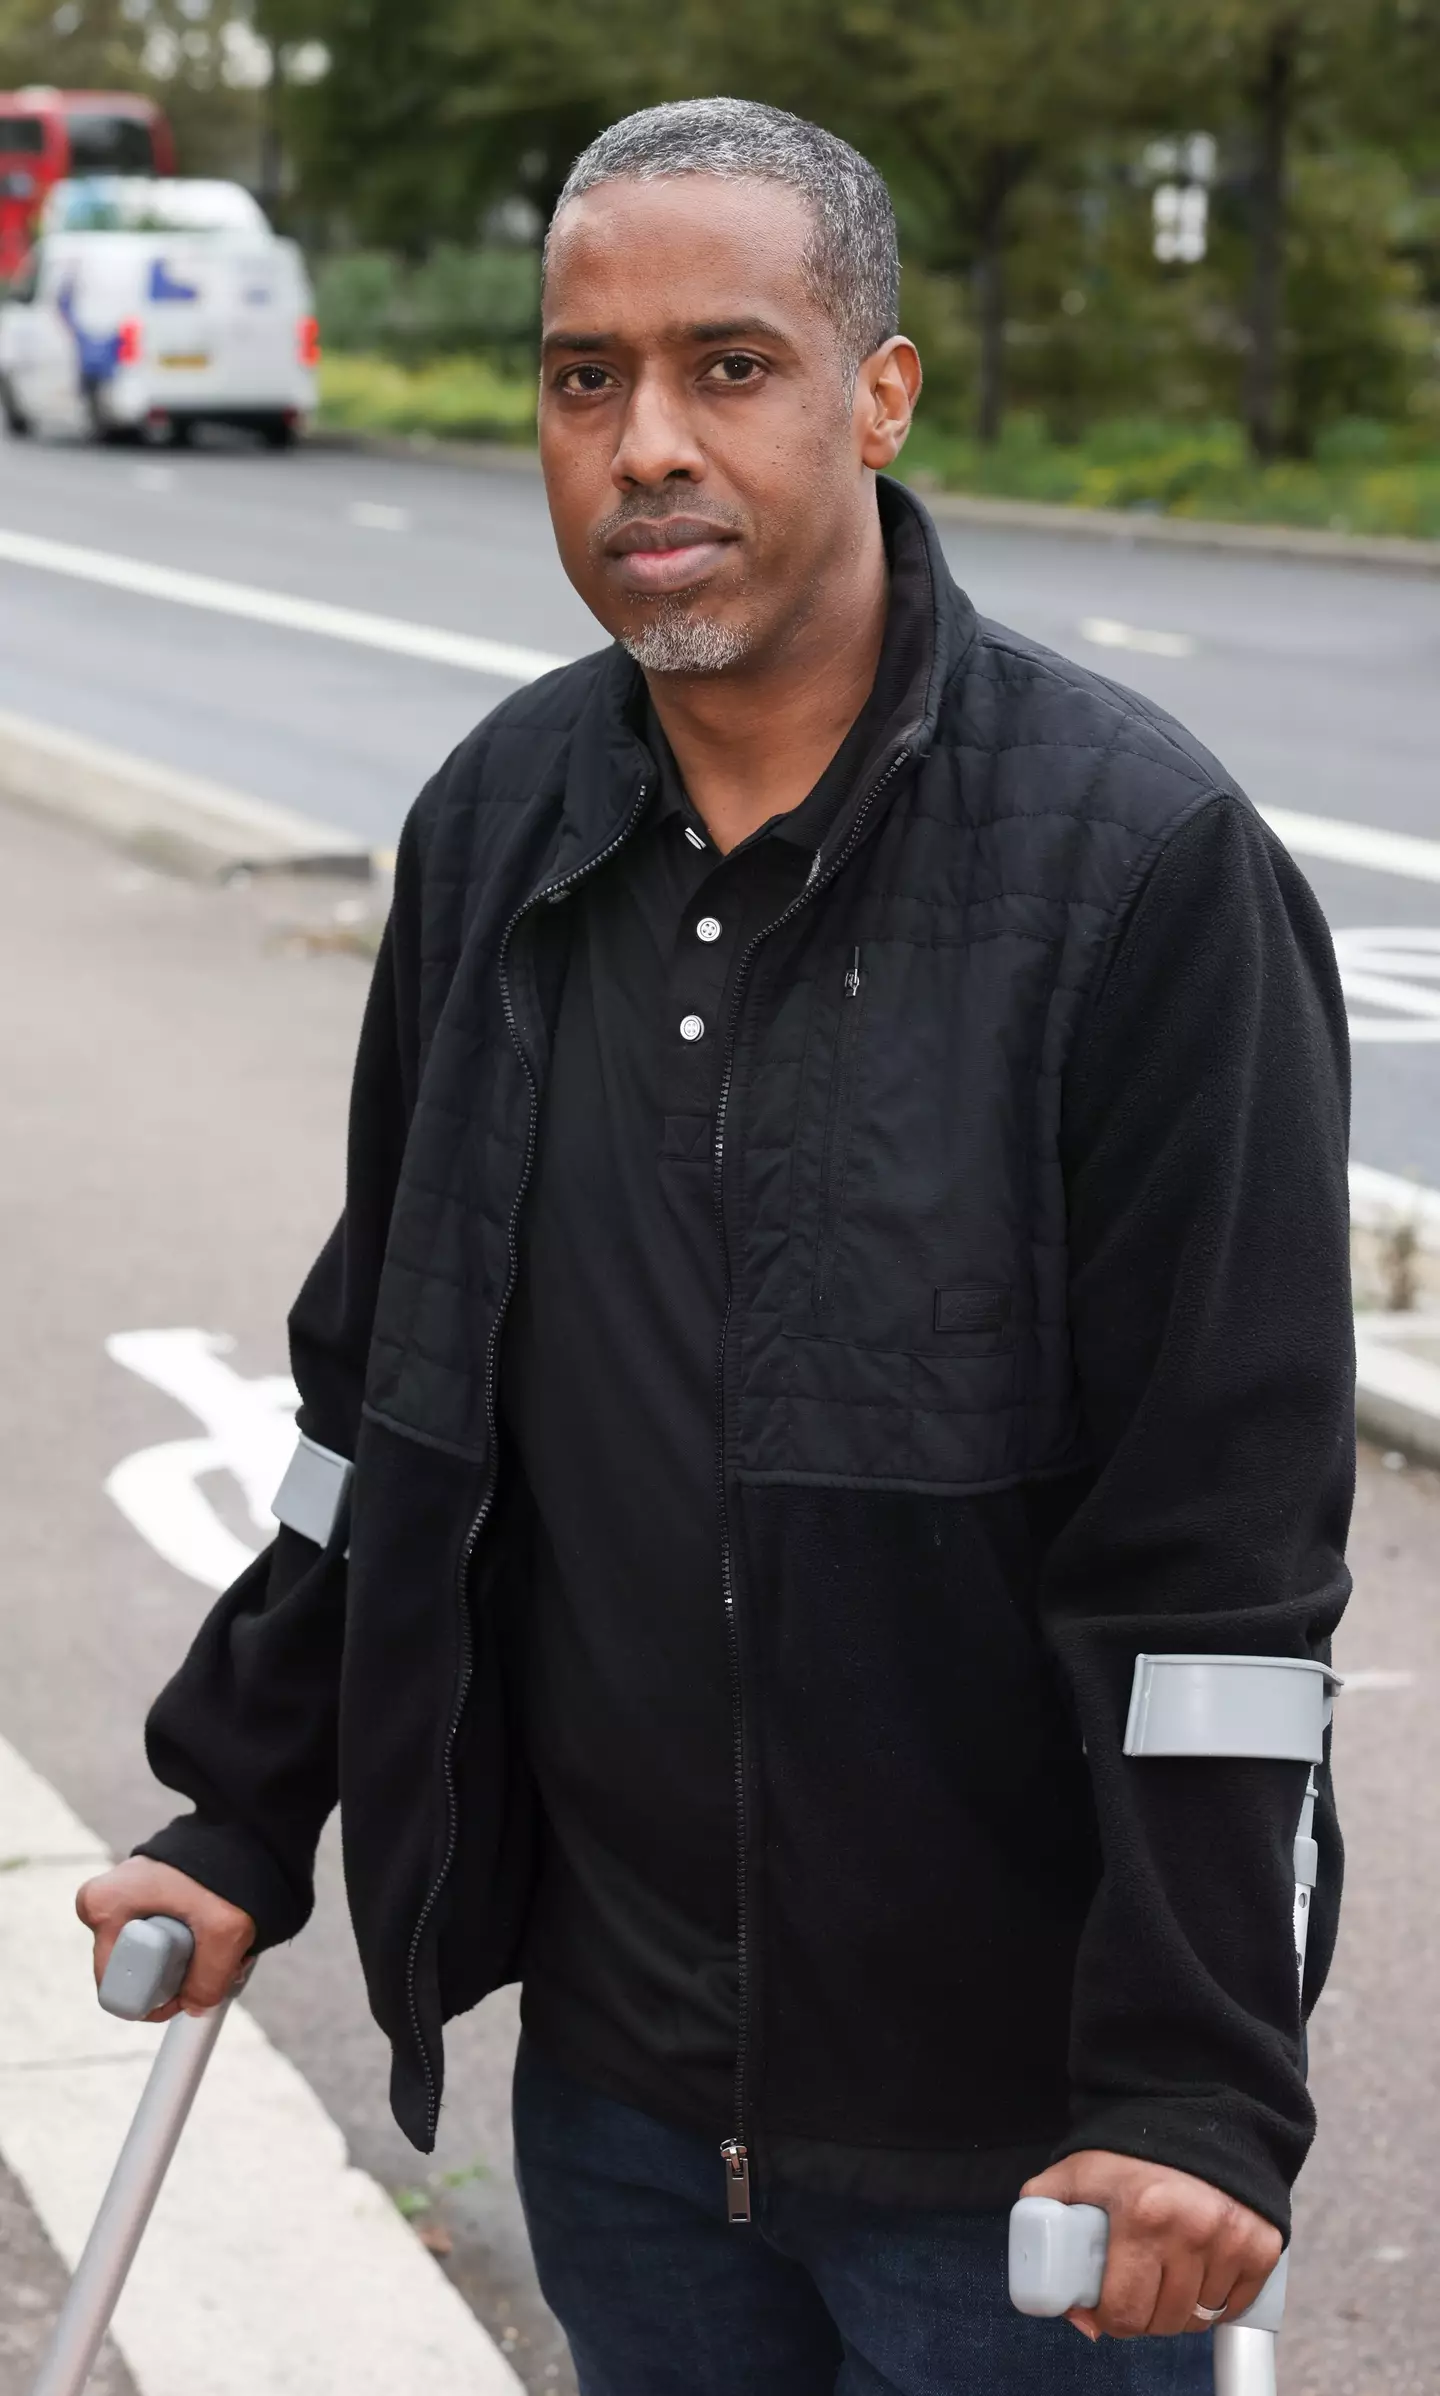 Mohamed has been unable to return to his job as a bus driver since the accident.